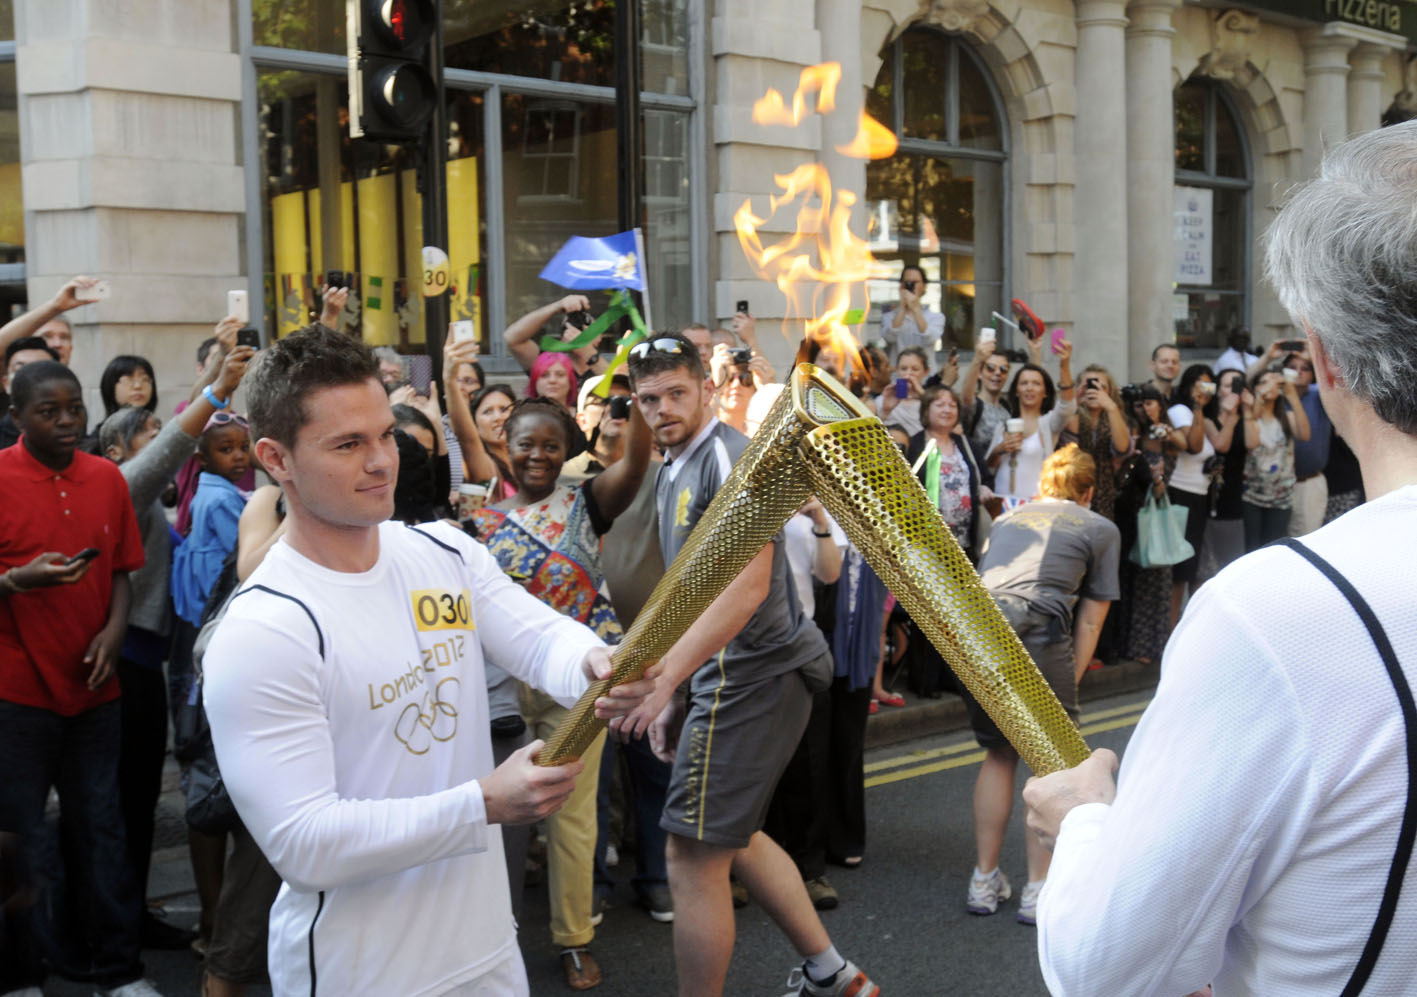 Enthusiastic crowds greet the Olympic Torch Relay as it passes through Islington in central London. The 'kissing point' as the flame passes from one torch to the next beofre the relay runner sets off.Â© Stefano Cagnoni - reportdigital.co.uk01789 262151 07831 121483info@reportdigital.co.ukwww.reportdigital.co.ukNUJ recommended terms & conditions apply. Moral rights asserted under Copyright Designs & Patents Act 1988. No part of this photo to be stored, reproduced, manipulated or transmitted by any means without permission.